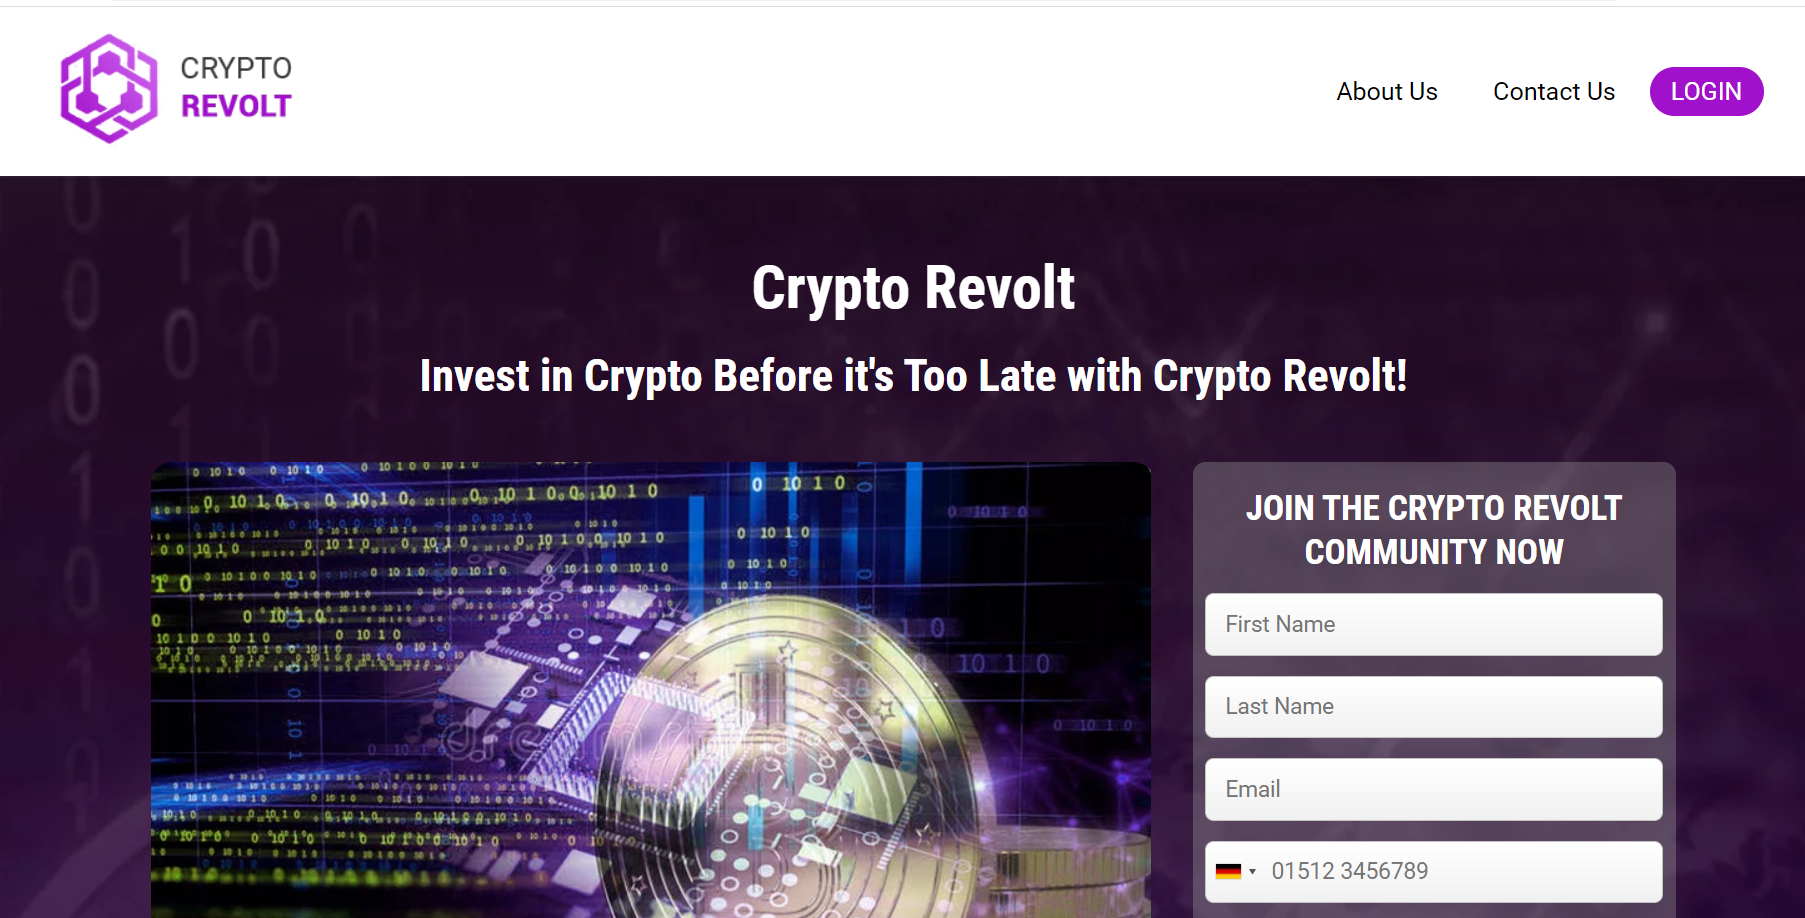 the official website of Crypto Revolt